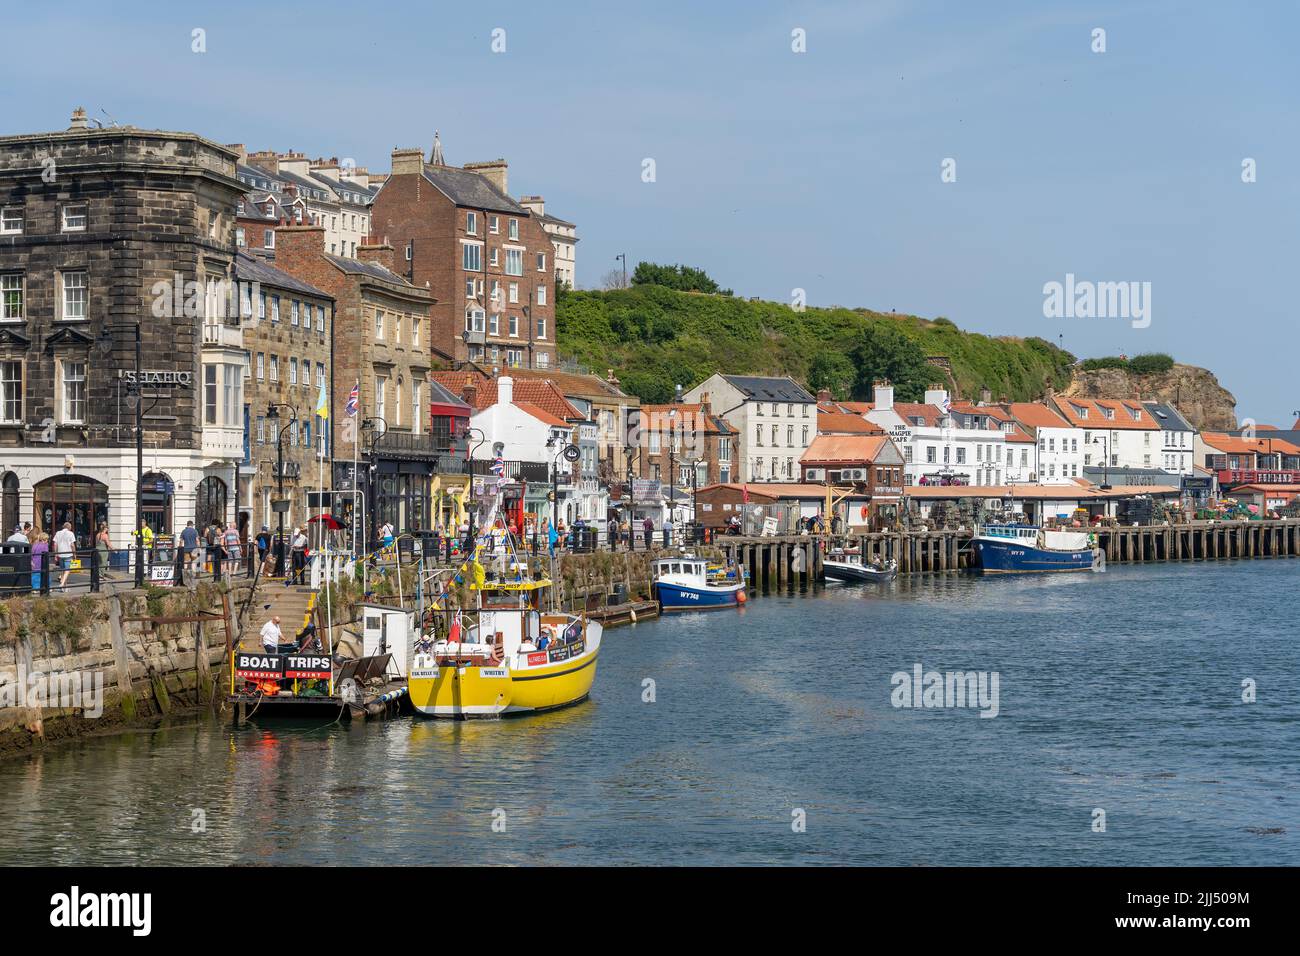 WHITBY,  NORTH YORKSHIRE, UK - JULY 19: View of the sea front in Whitby, North Yorkshire on July 19, 2022. Unidentified people Stock Photo